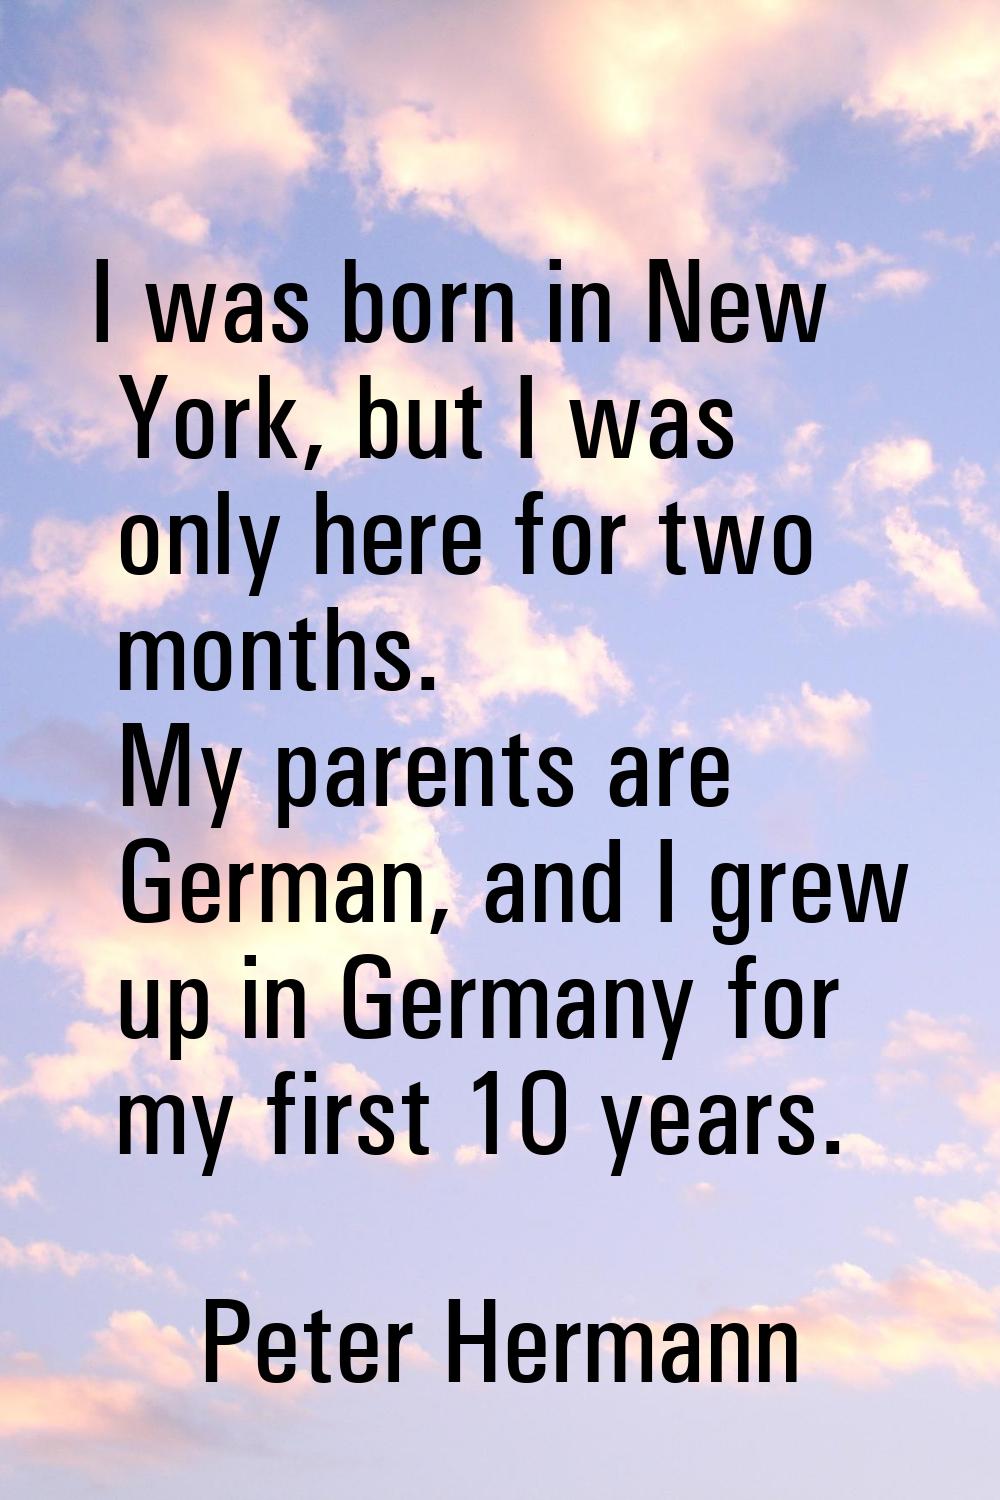 I was born in New York, but I was only here for two months. My parents are German, and I grew up in